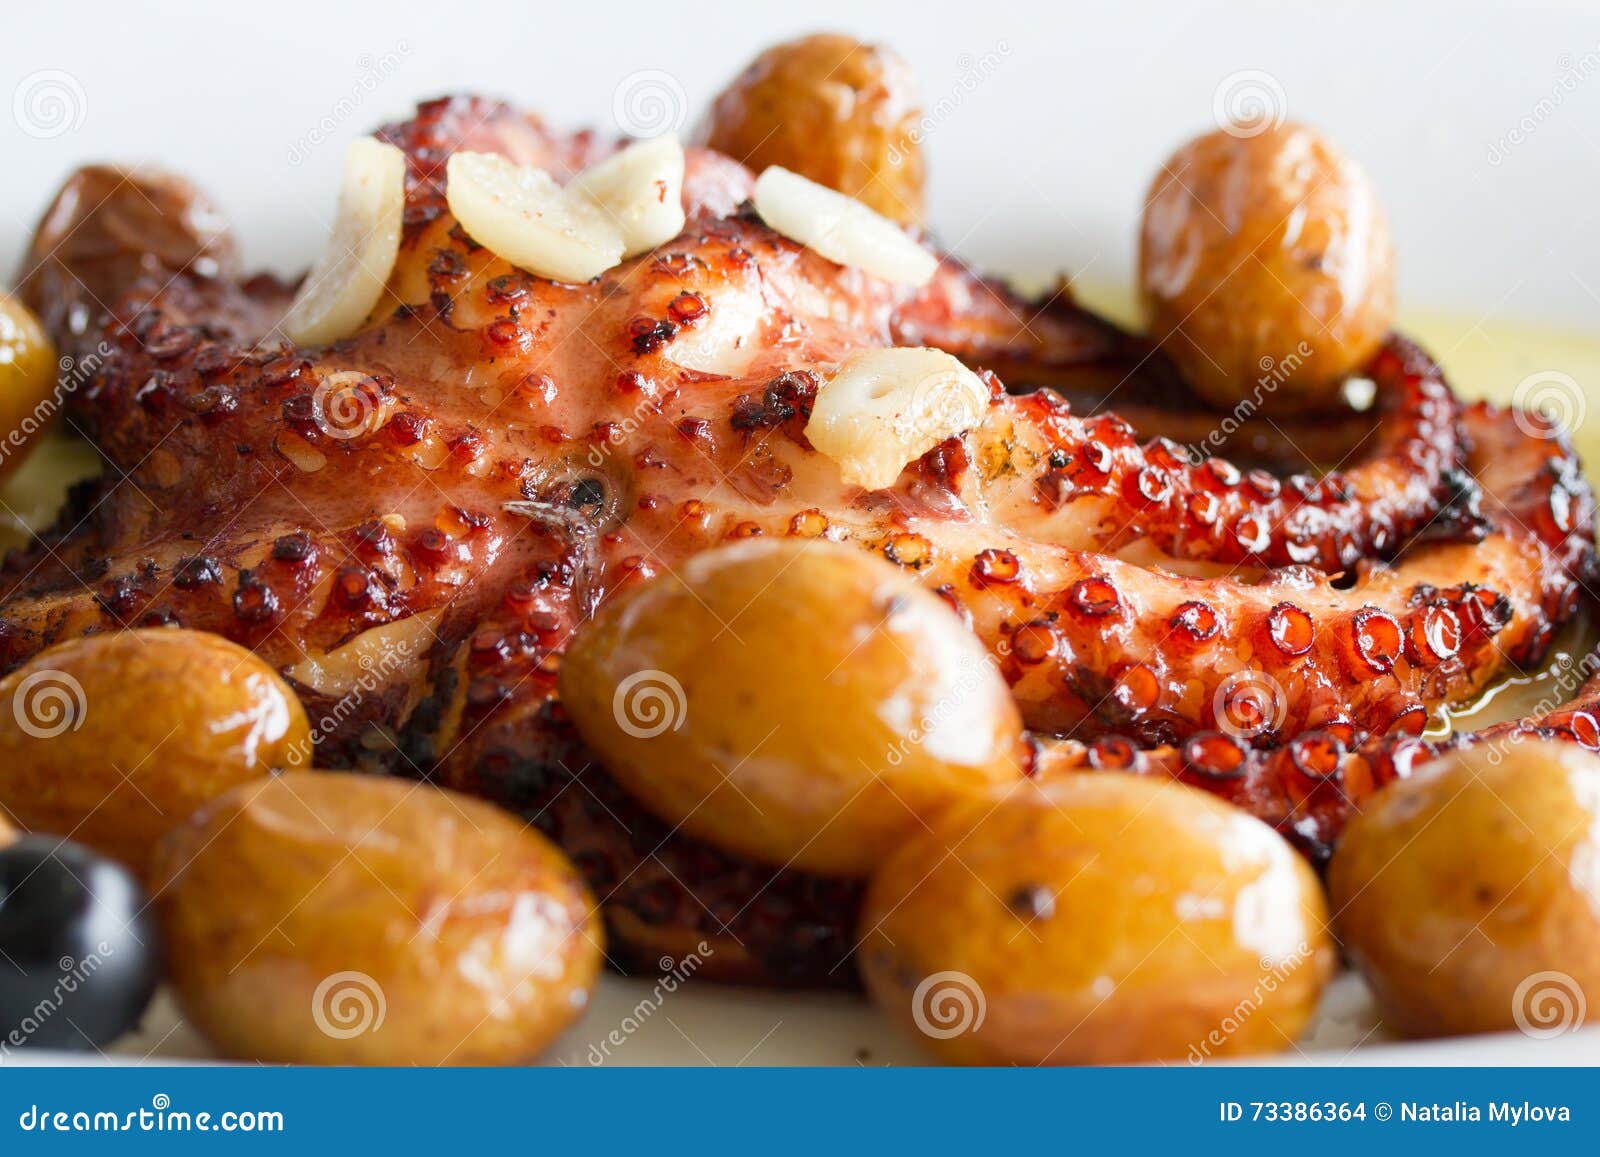 traditional portuguese dish octopus